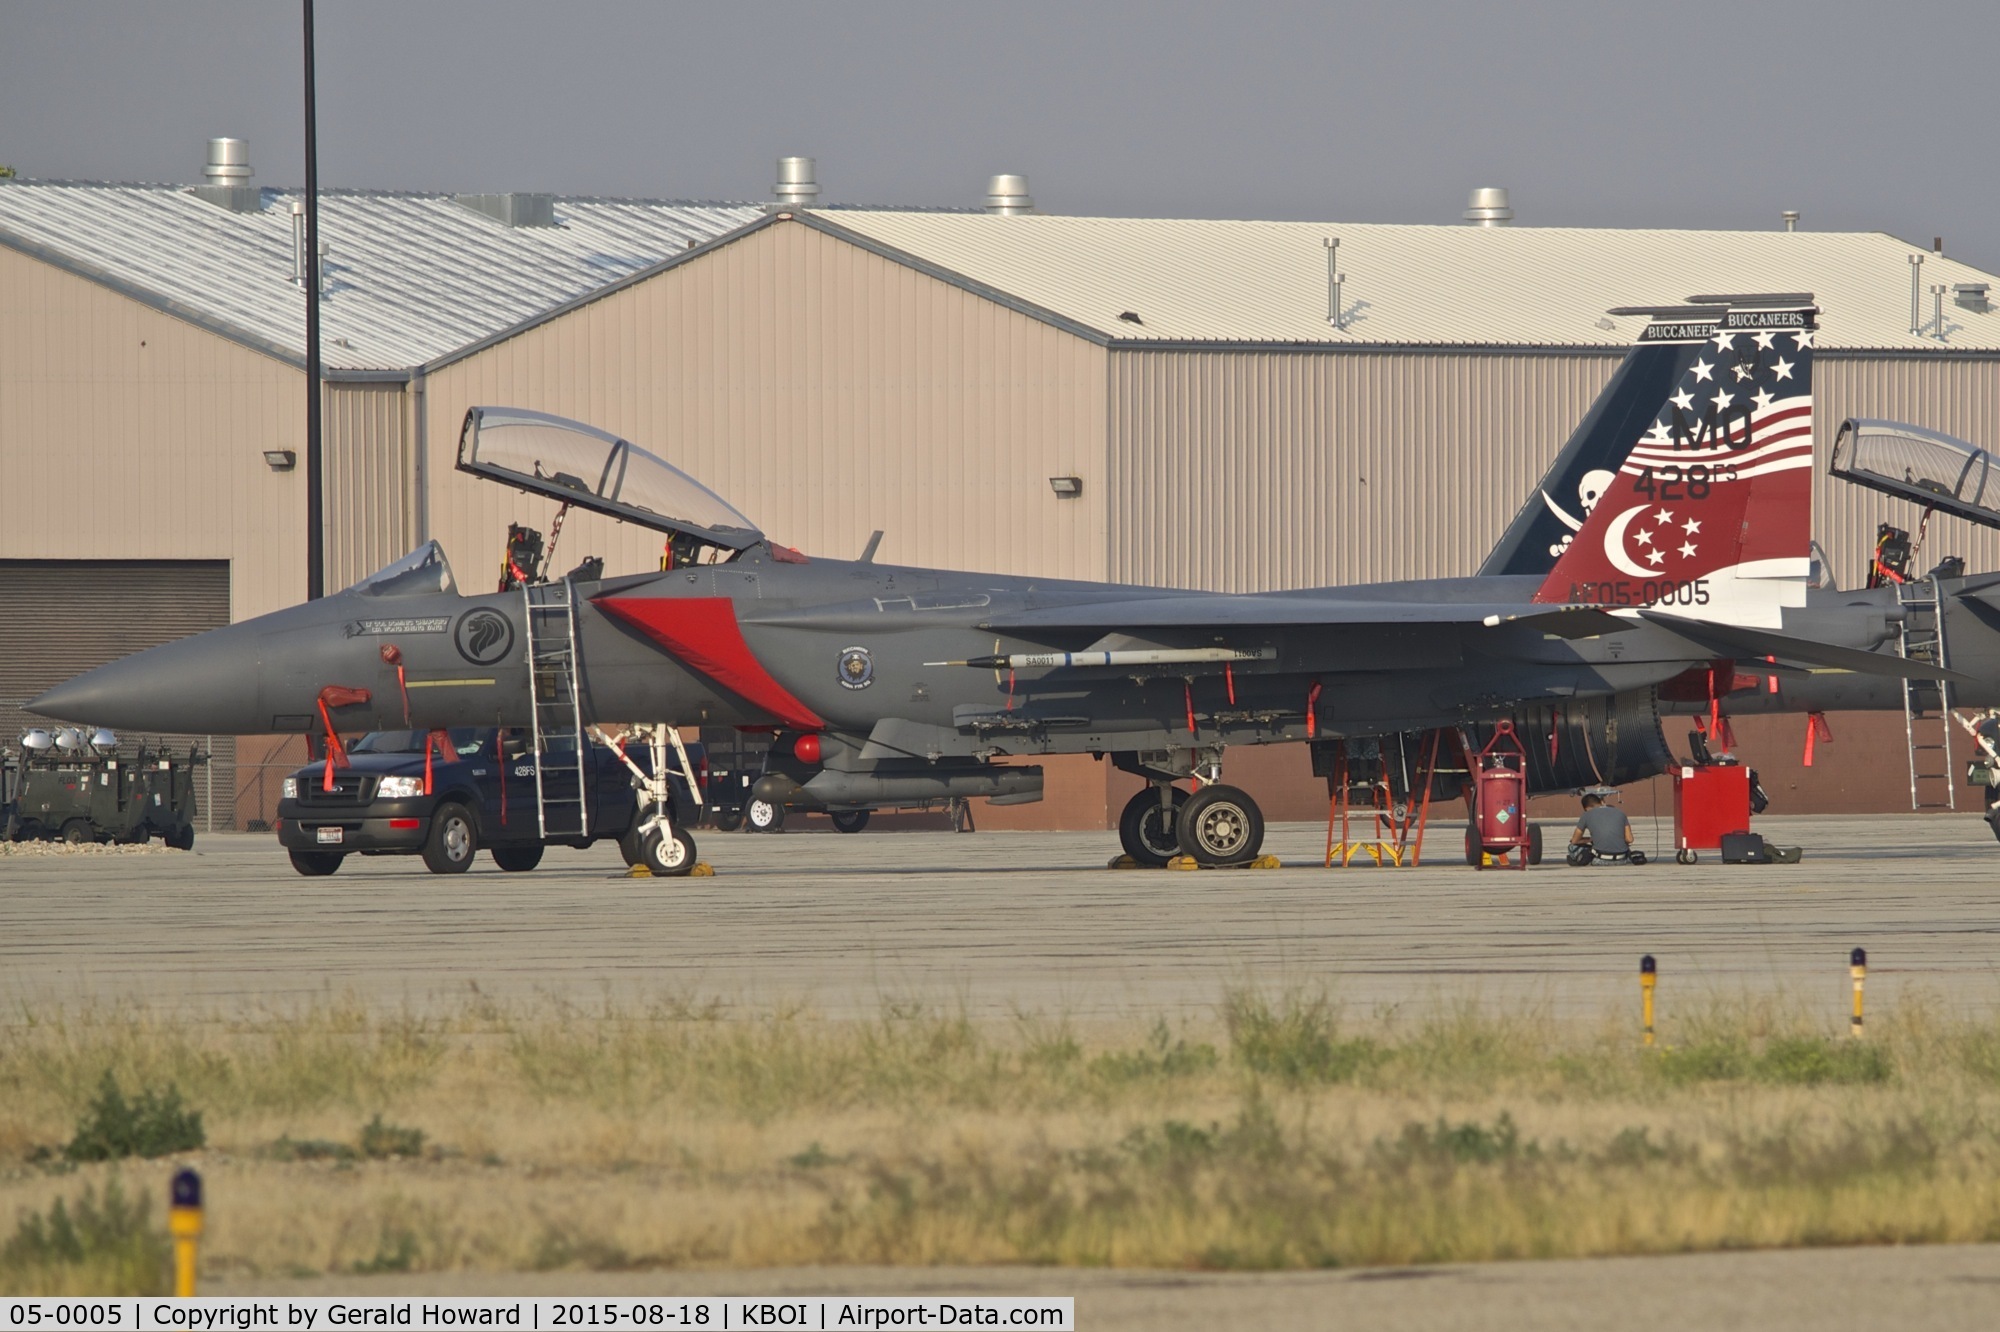 05-0005, 2005 Boeing F-15SG Strike Eagle C/N SG5, Parked on the Idaho ANG ramp. 428th Fighter Sq. 